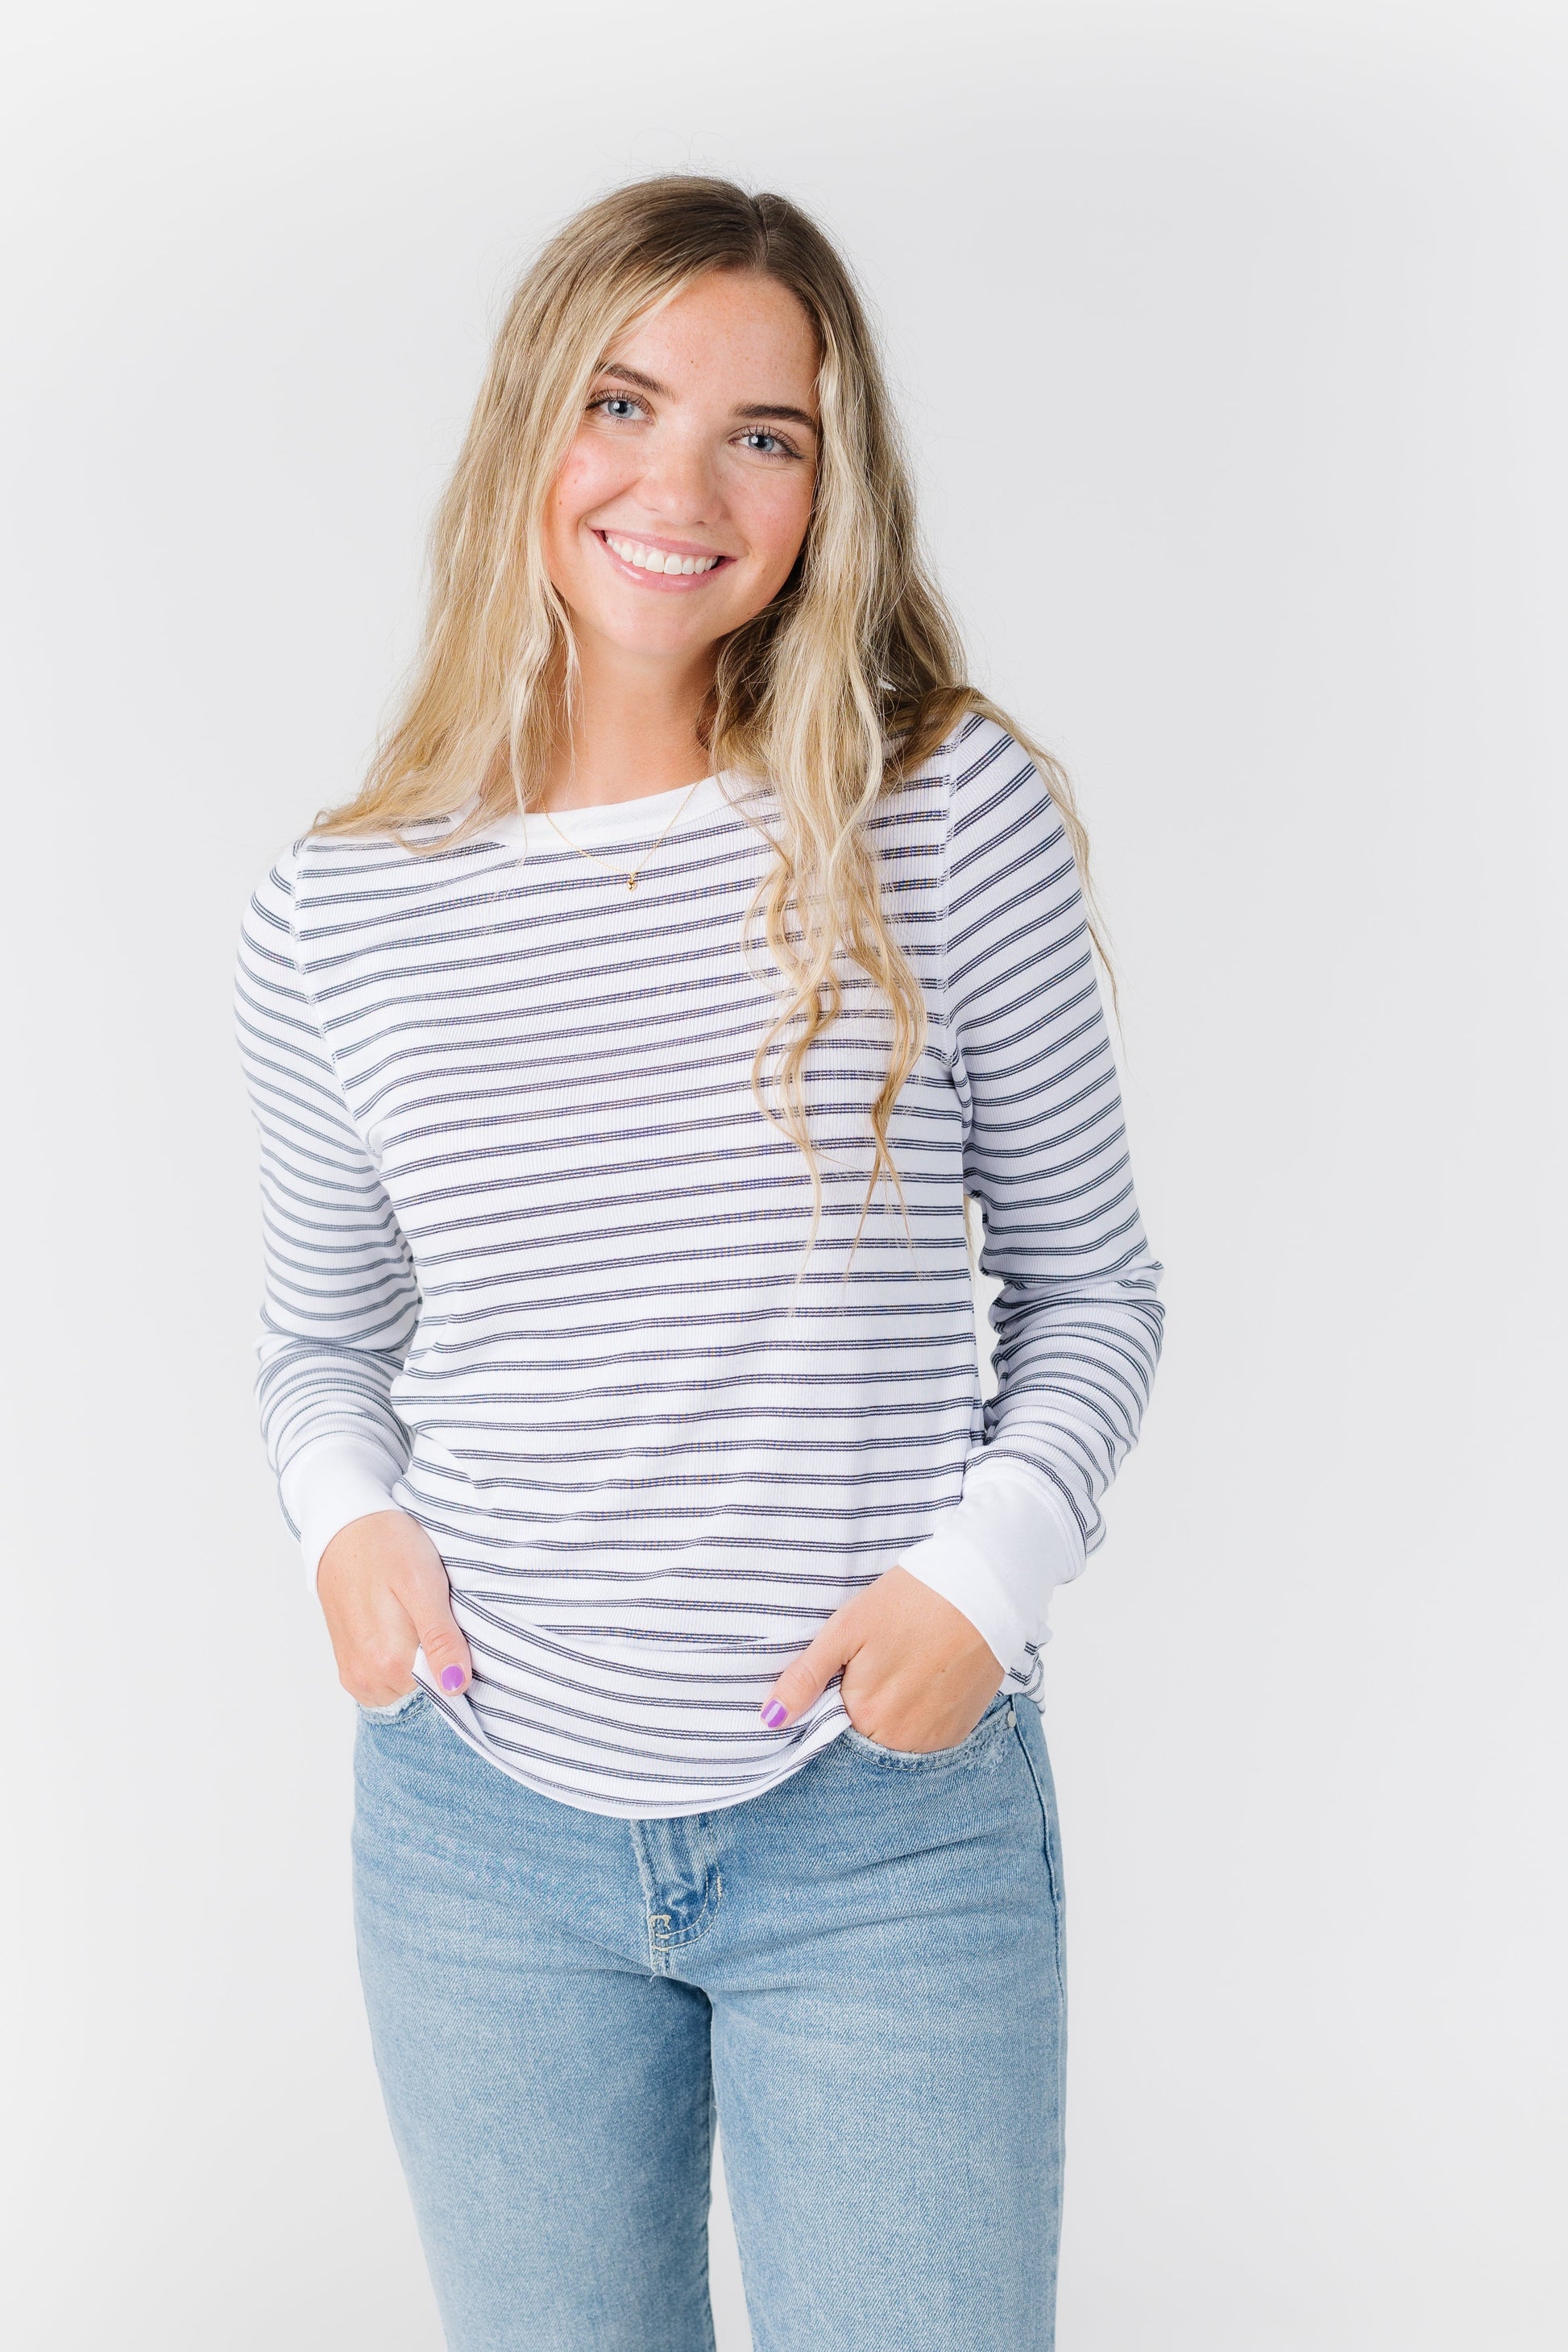 Stacy Top Women's Long Sleeve T Thread & Supply White/Navy L 